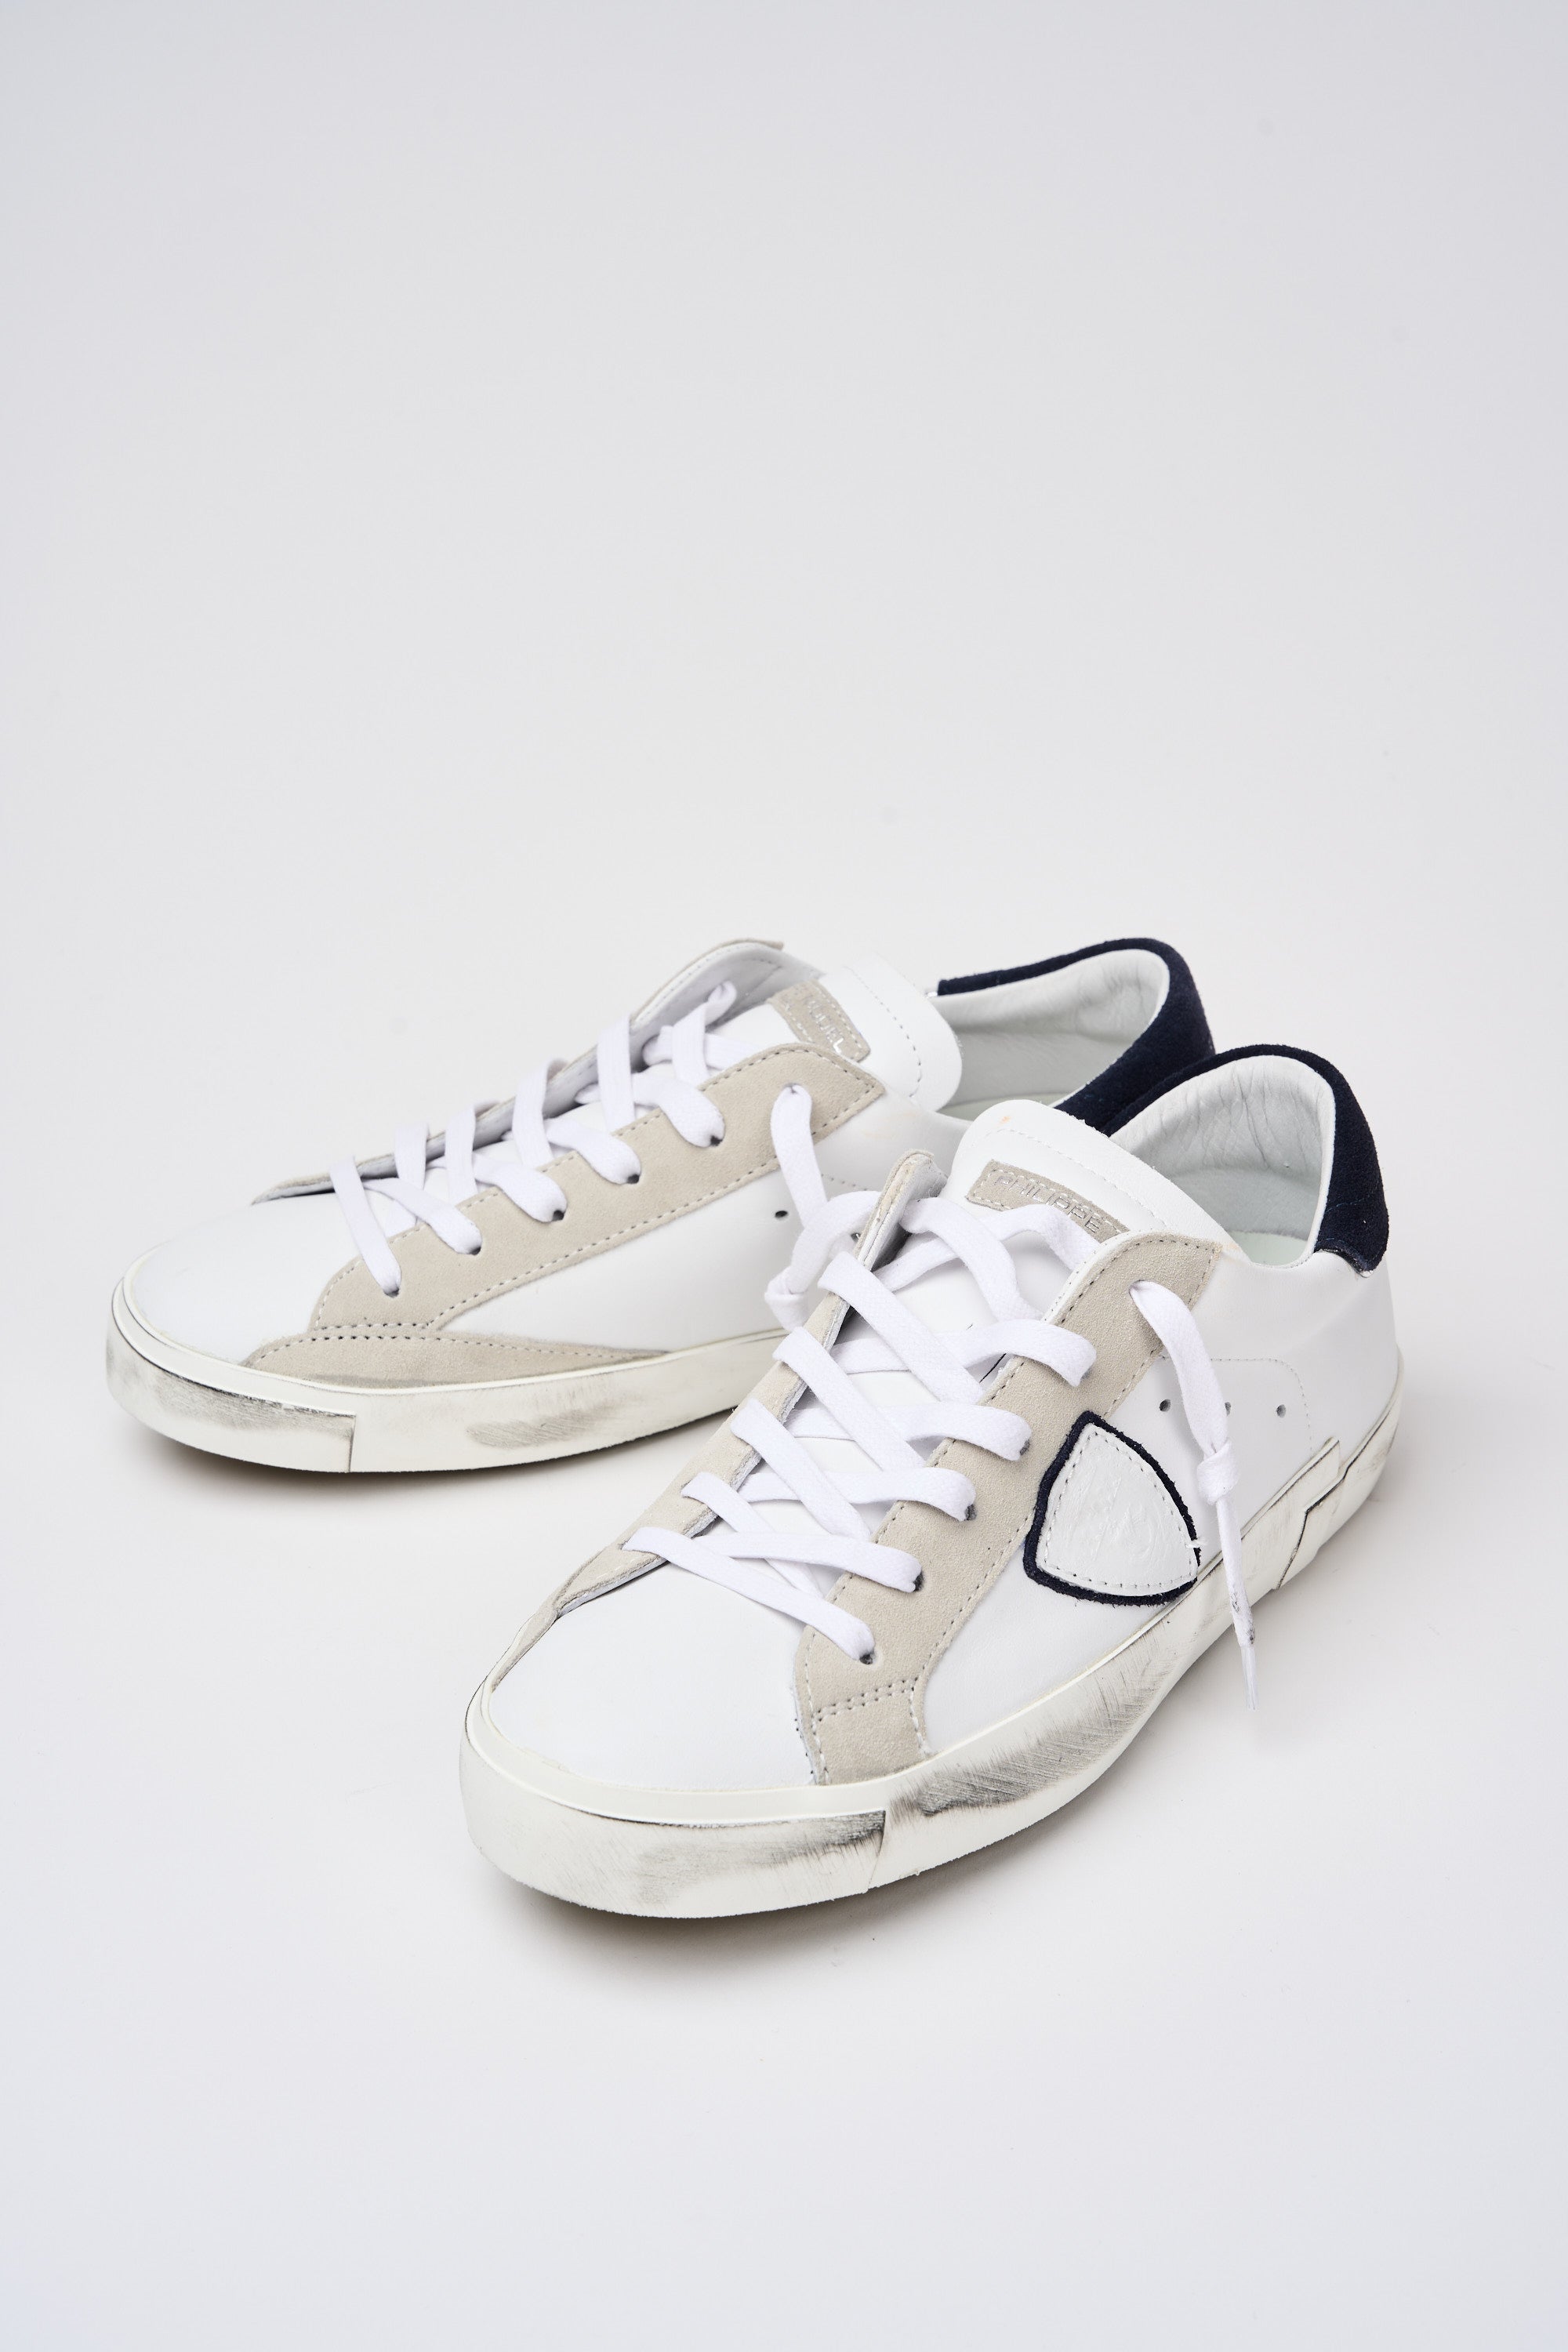 Philippe Model Sneaker PRSX Leather/Suede White/Blue-7